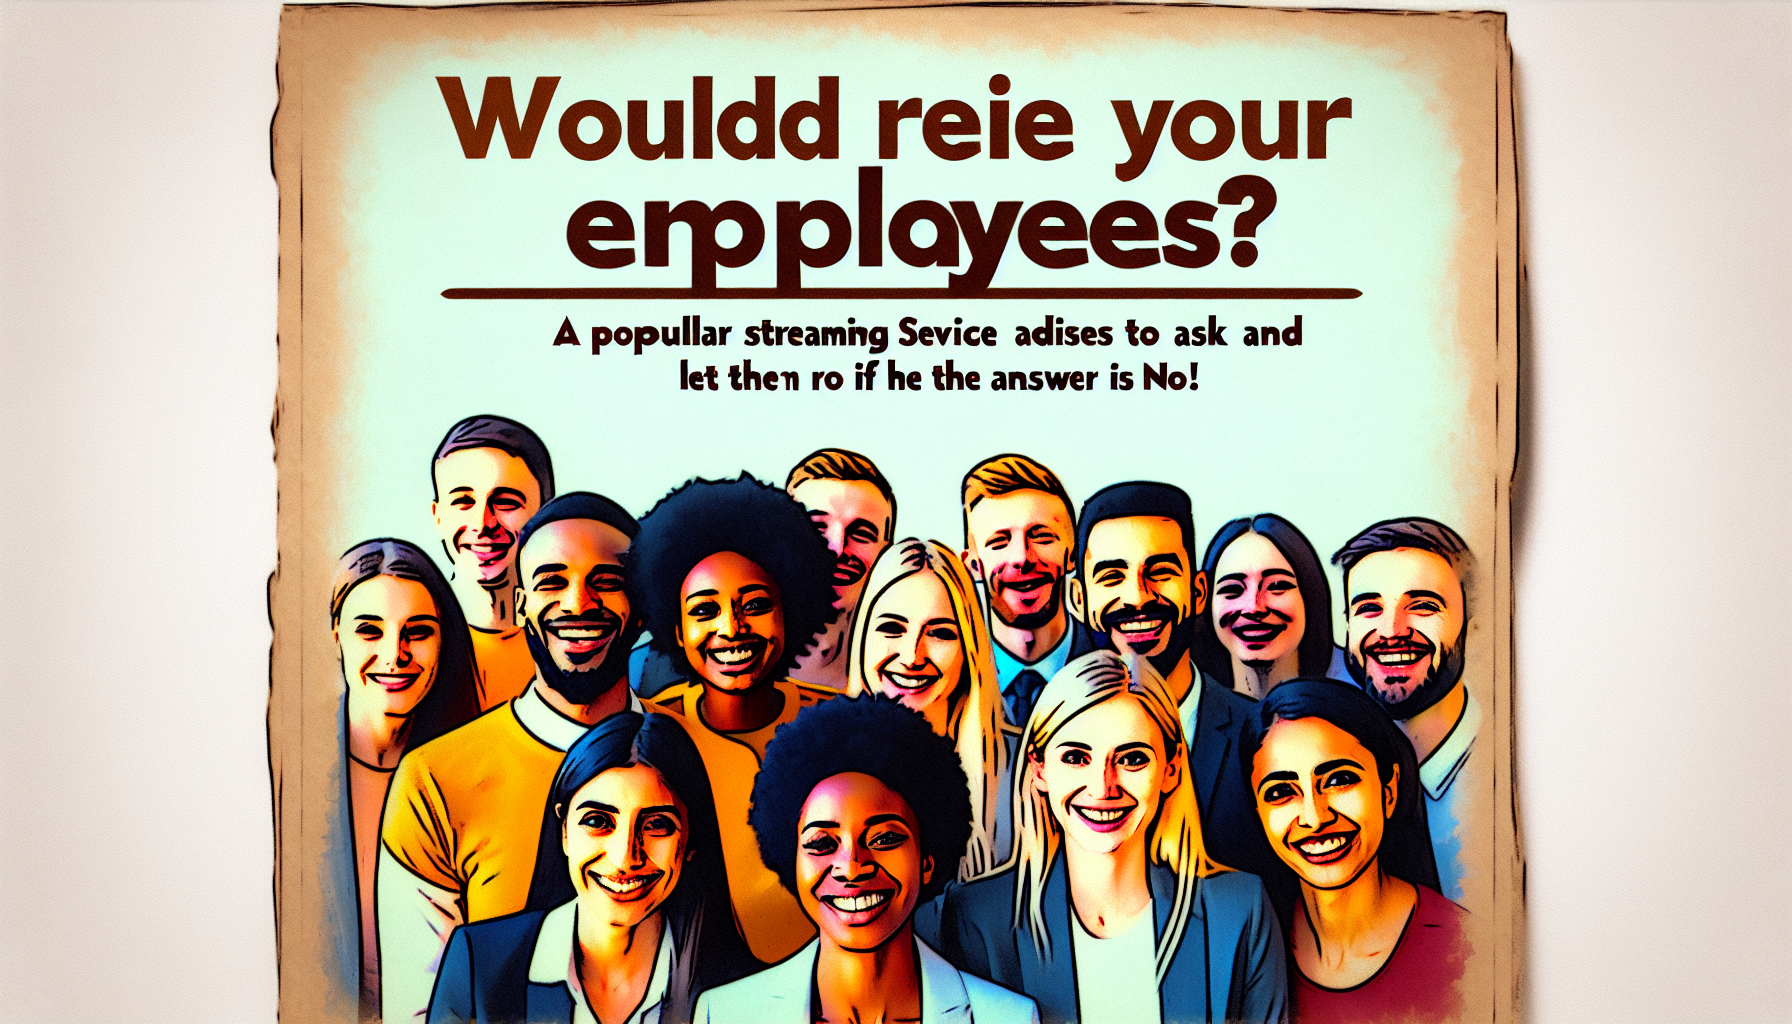 netflix encourages managers to ask themselves if they would rehire their employees and to consider firing them if the answer is no. learn more about this unconventional approach to employee performance evaluation.